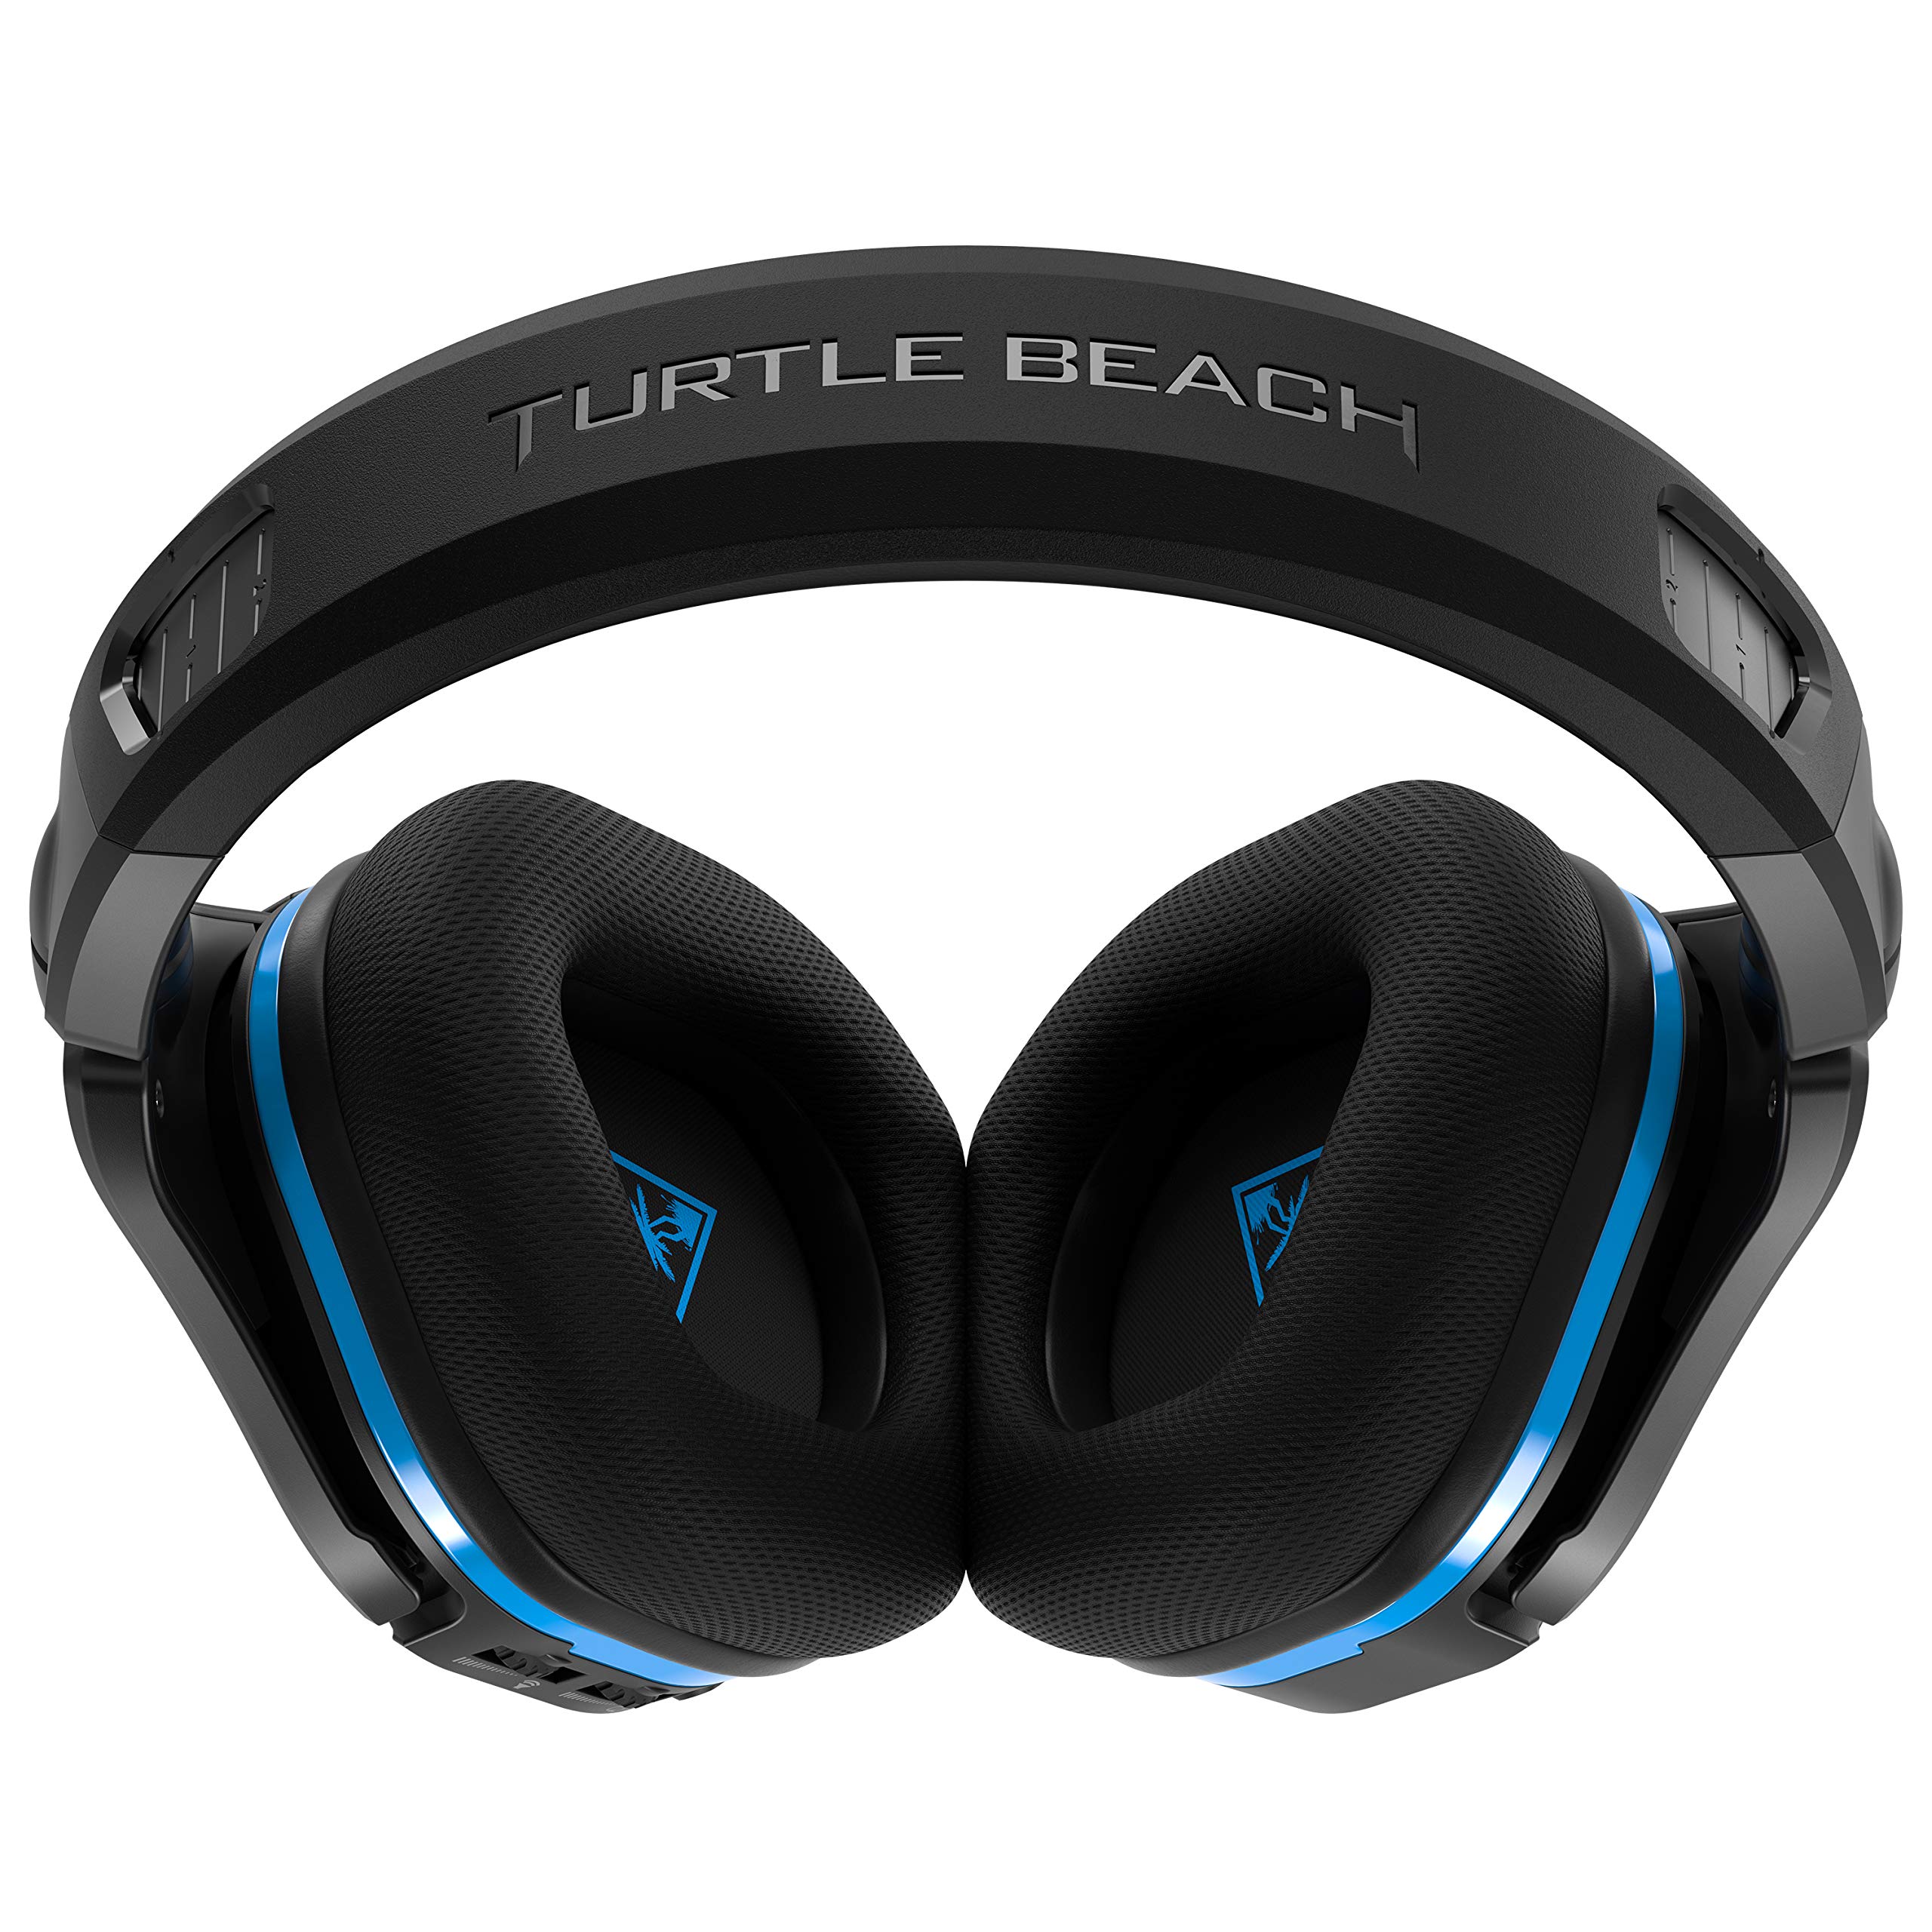 Turtle Beach Stealth 600 Gen 2 Wireless Gaming Headset for PS5, PS4, PS4 Pro, PlayStation, & Nintendo Switch with 50mm Speakers, 15-Hour Battery life, Flip-to-Mute Mic, and Spatial Audio - Black